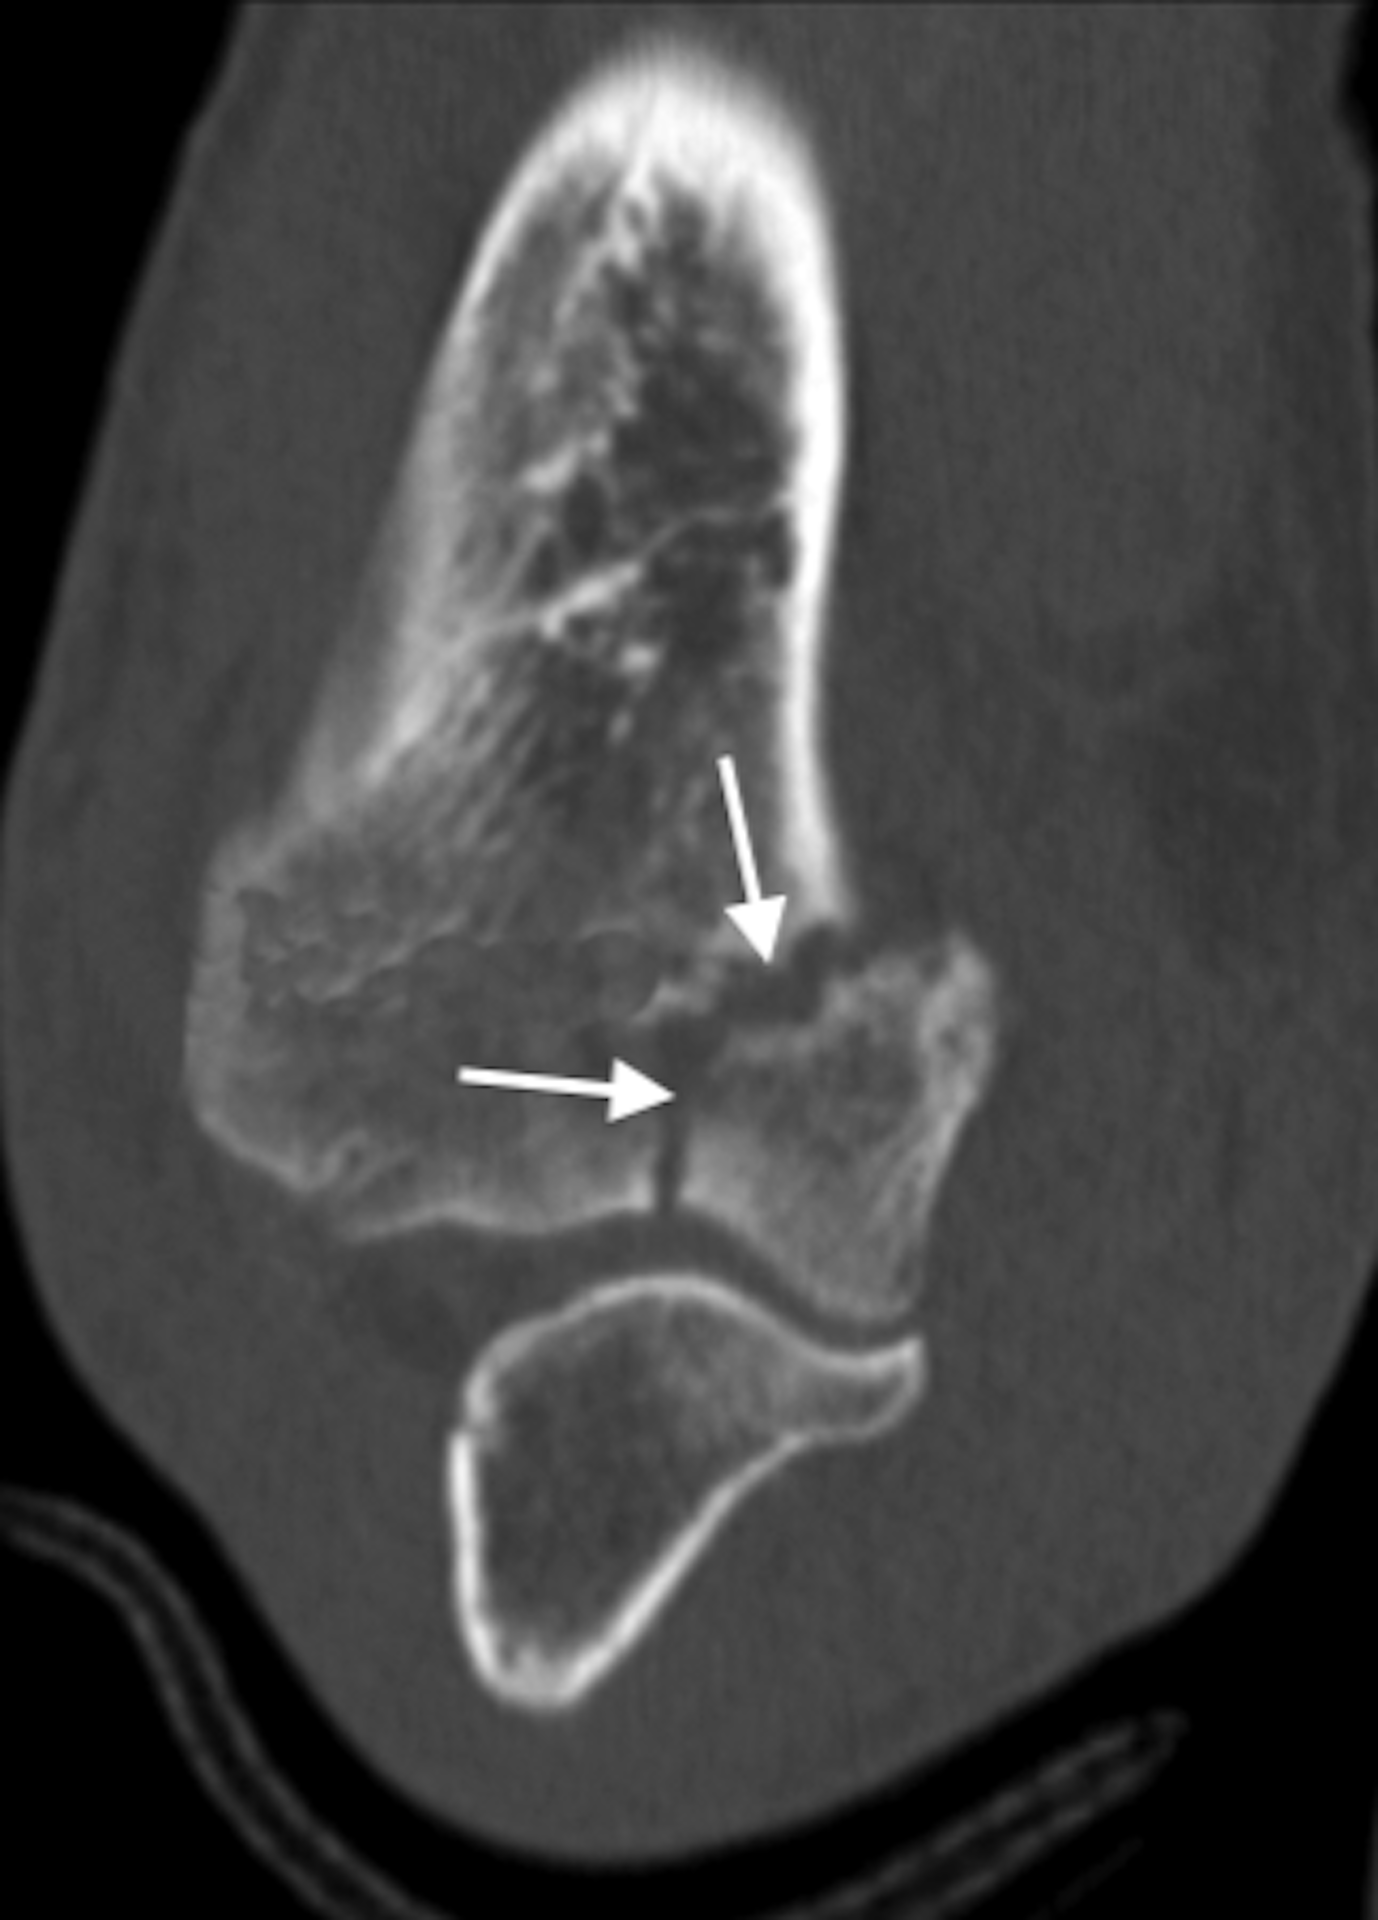 Trochlear Fracture (arrows), CT Scan, as part of a distal humerus fracture